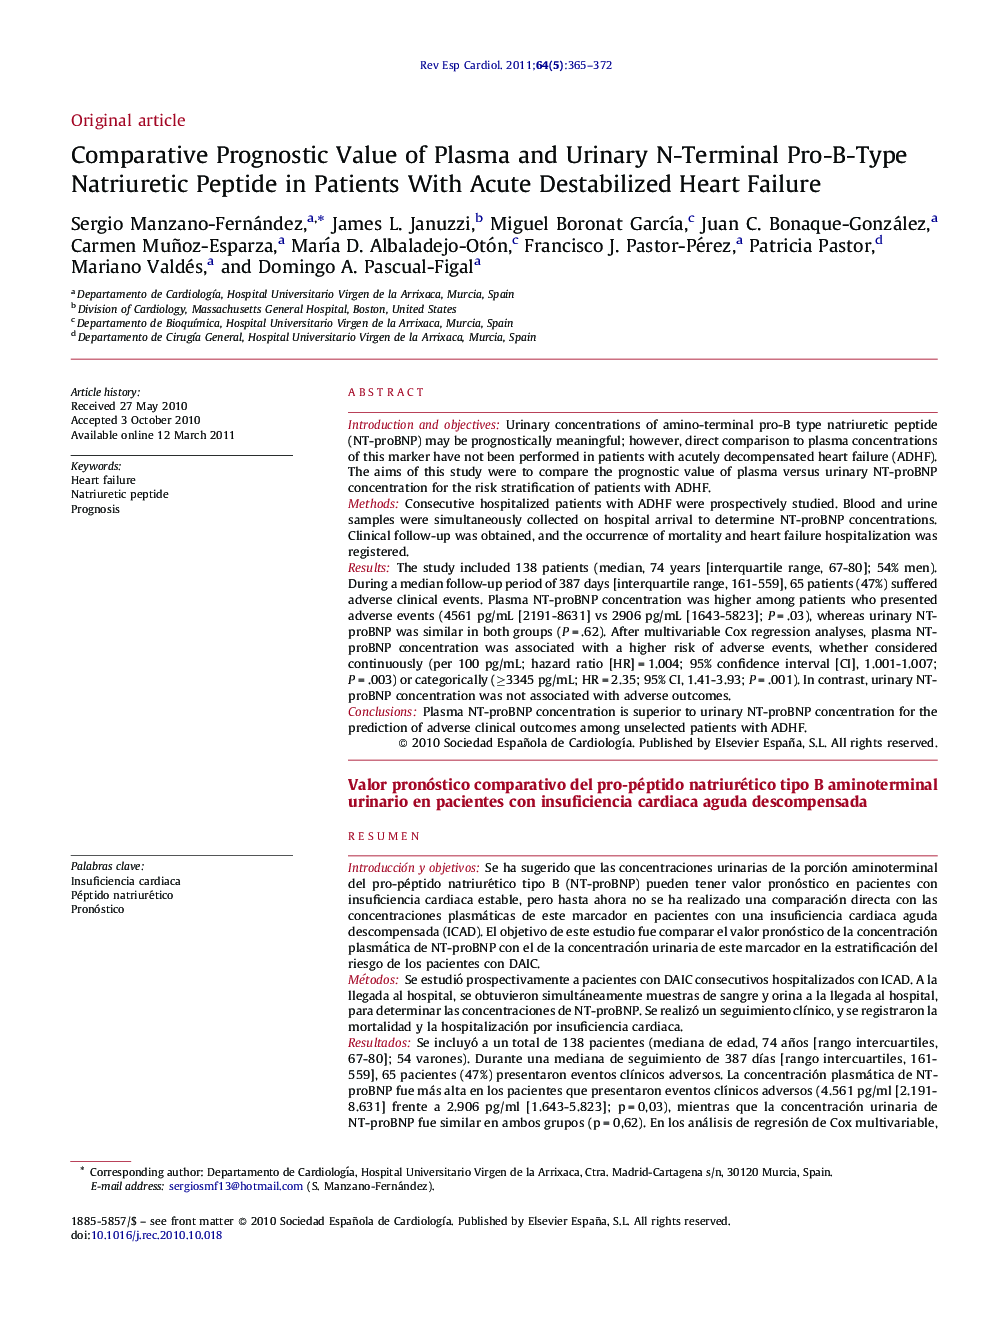 Comparative Prognostic Value of Plasma and Urinary N-Terminal Pro-B-Type Natriuretic Peptide in Patients With Acute Destabilized Heart Failure